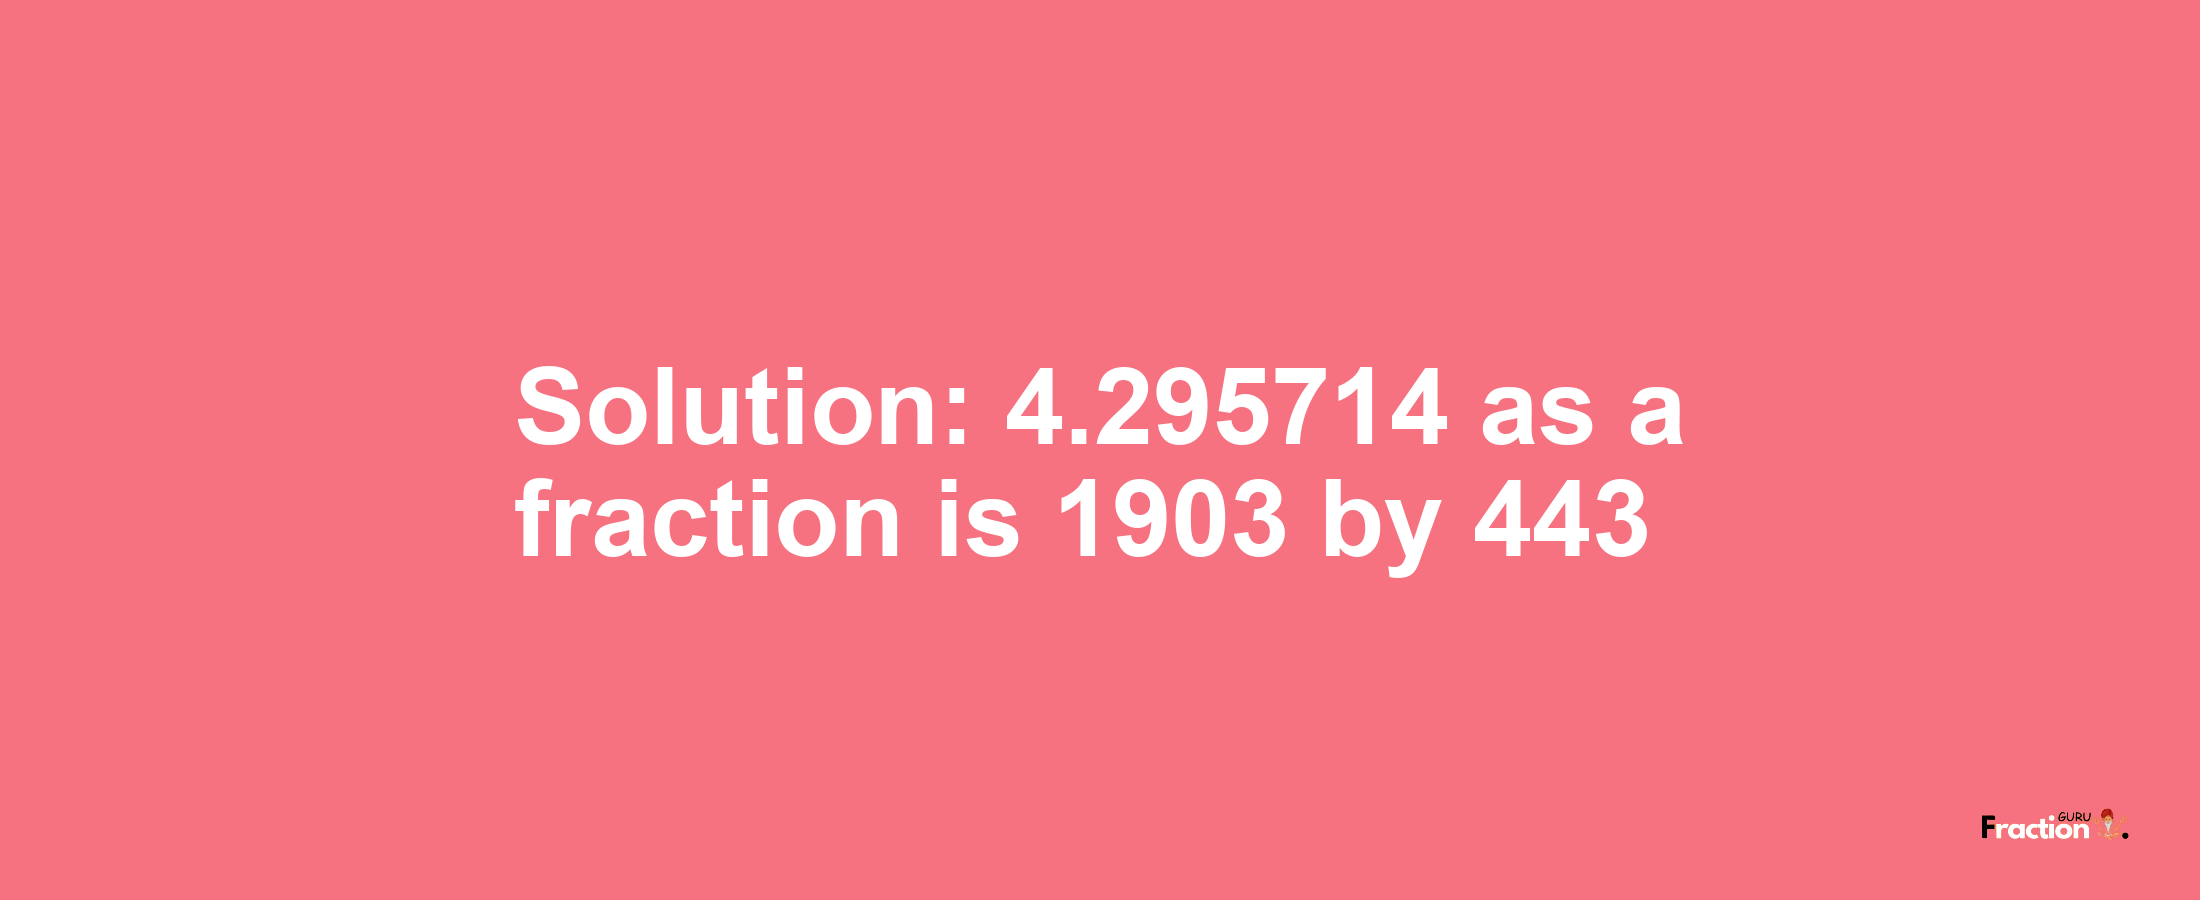 Solution:4.295714 as a fraction is 1903/443